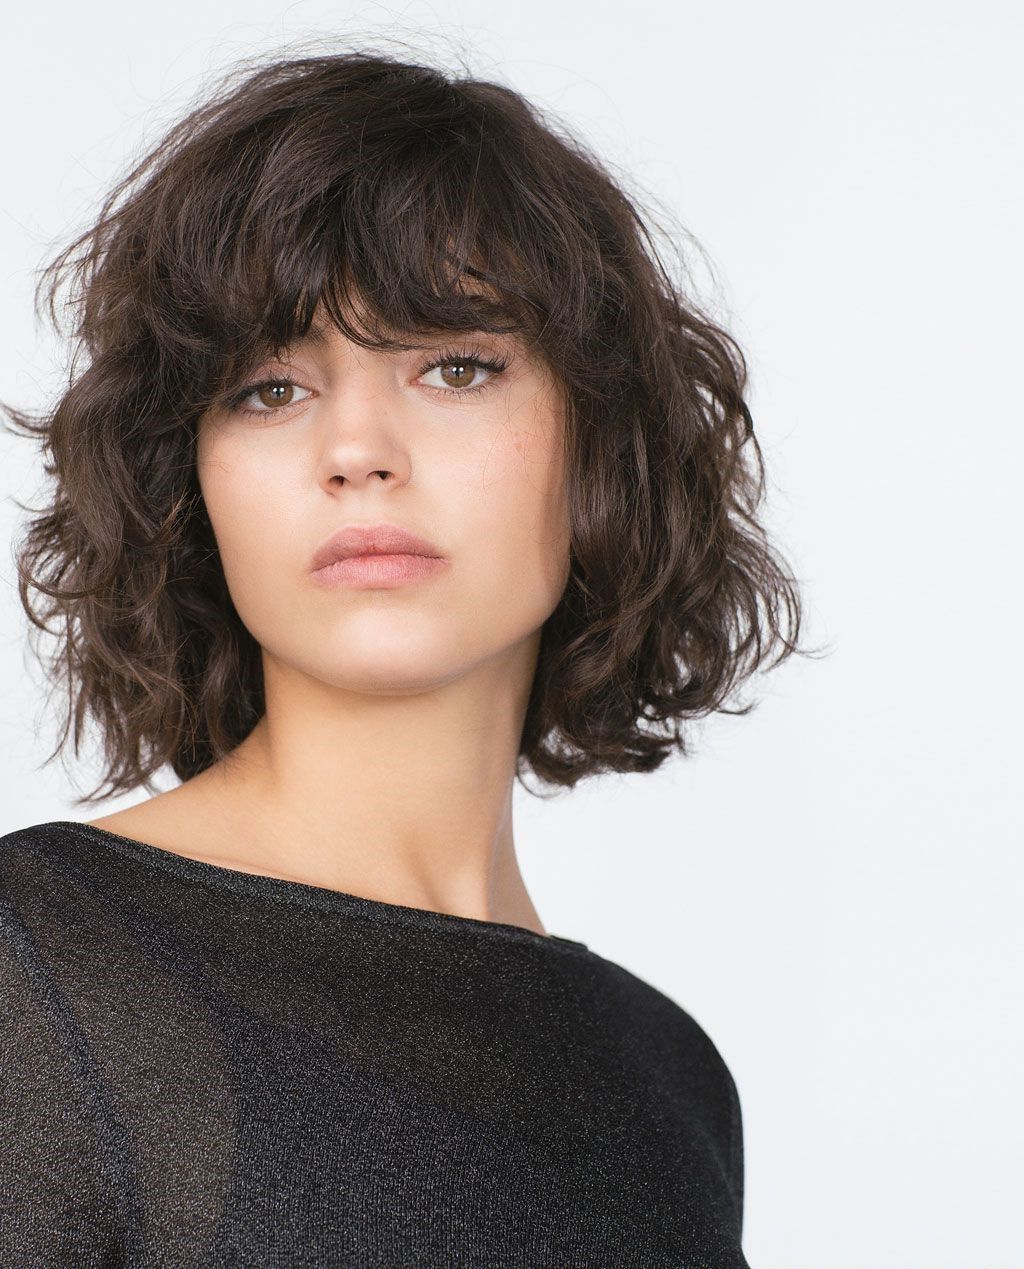 Latest Perfect Bangs And Wild Layers Hairstyles In Most Favored Short Bob With Bangs 2019 That You Can't Miss (View 7 of 20)